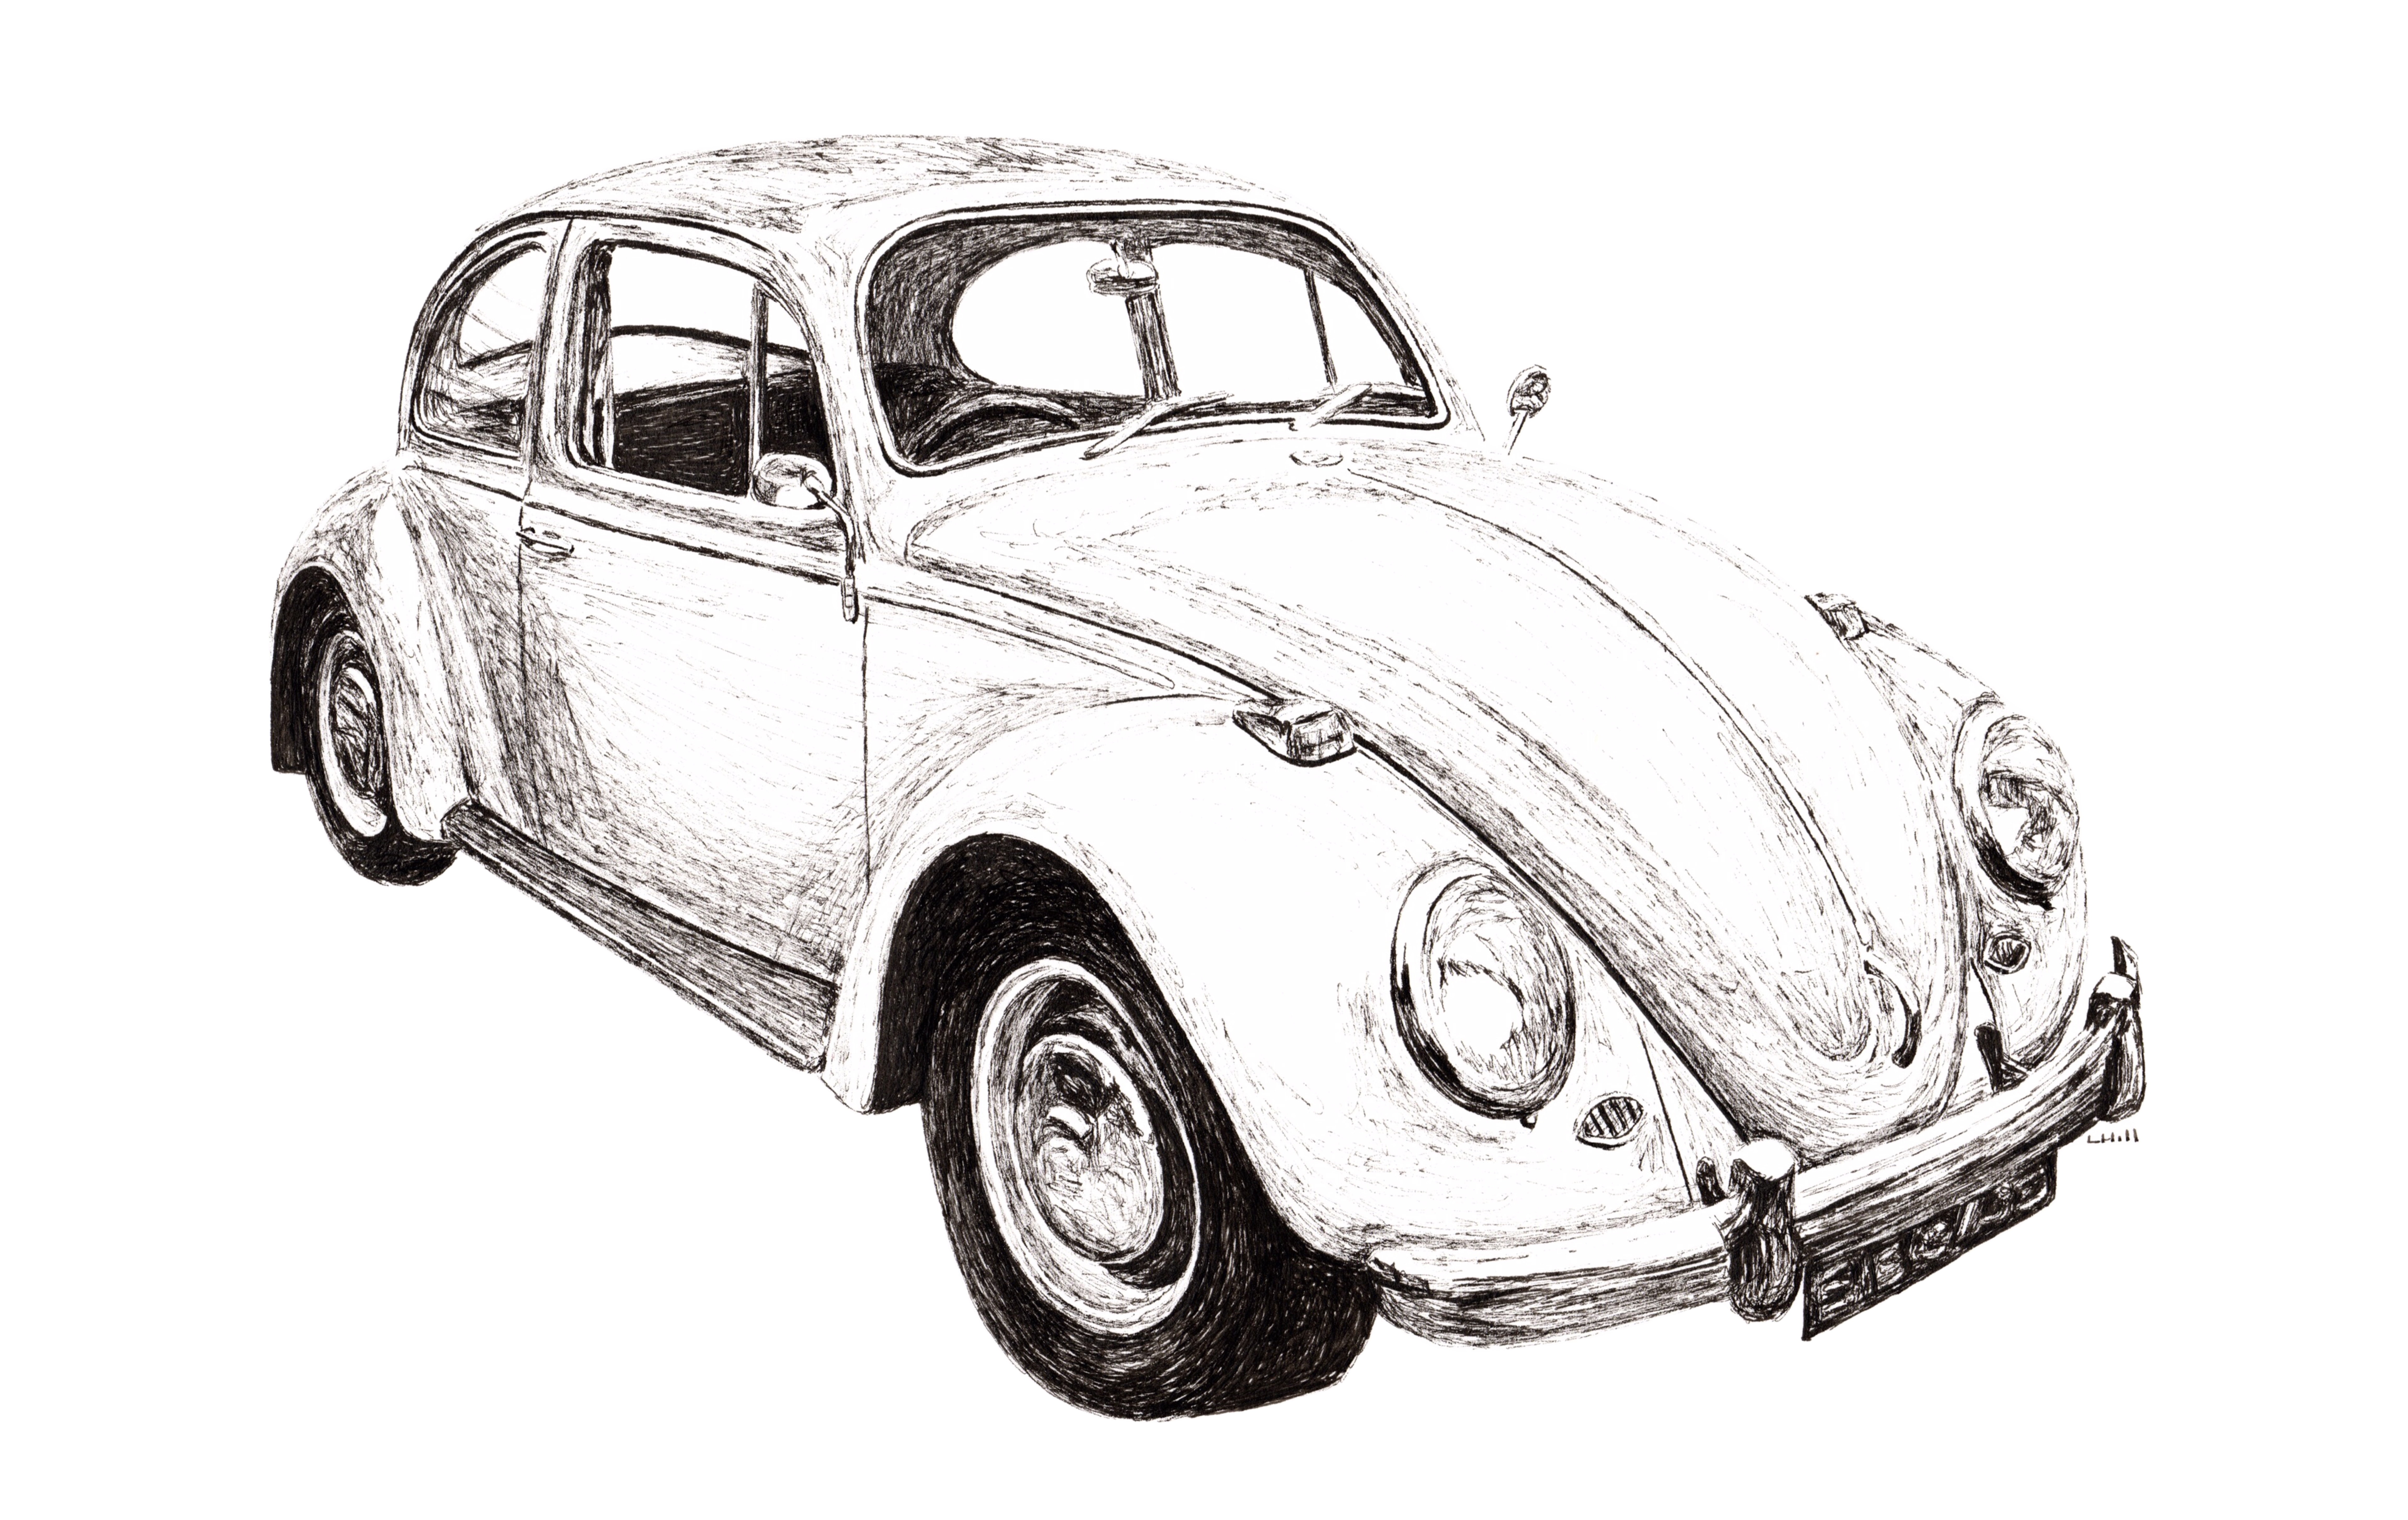 1967 VW Beetle pen and ink illustration by Louisa Hill